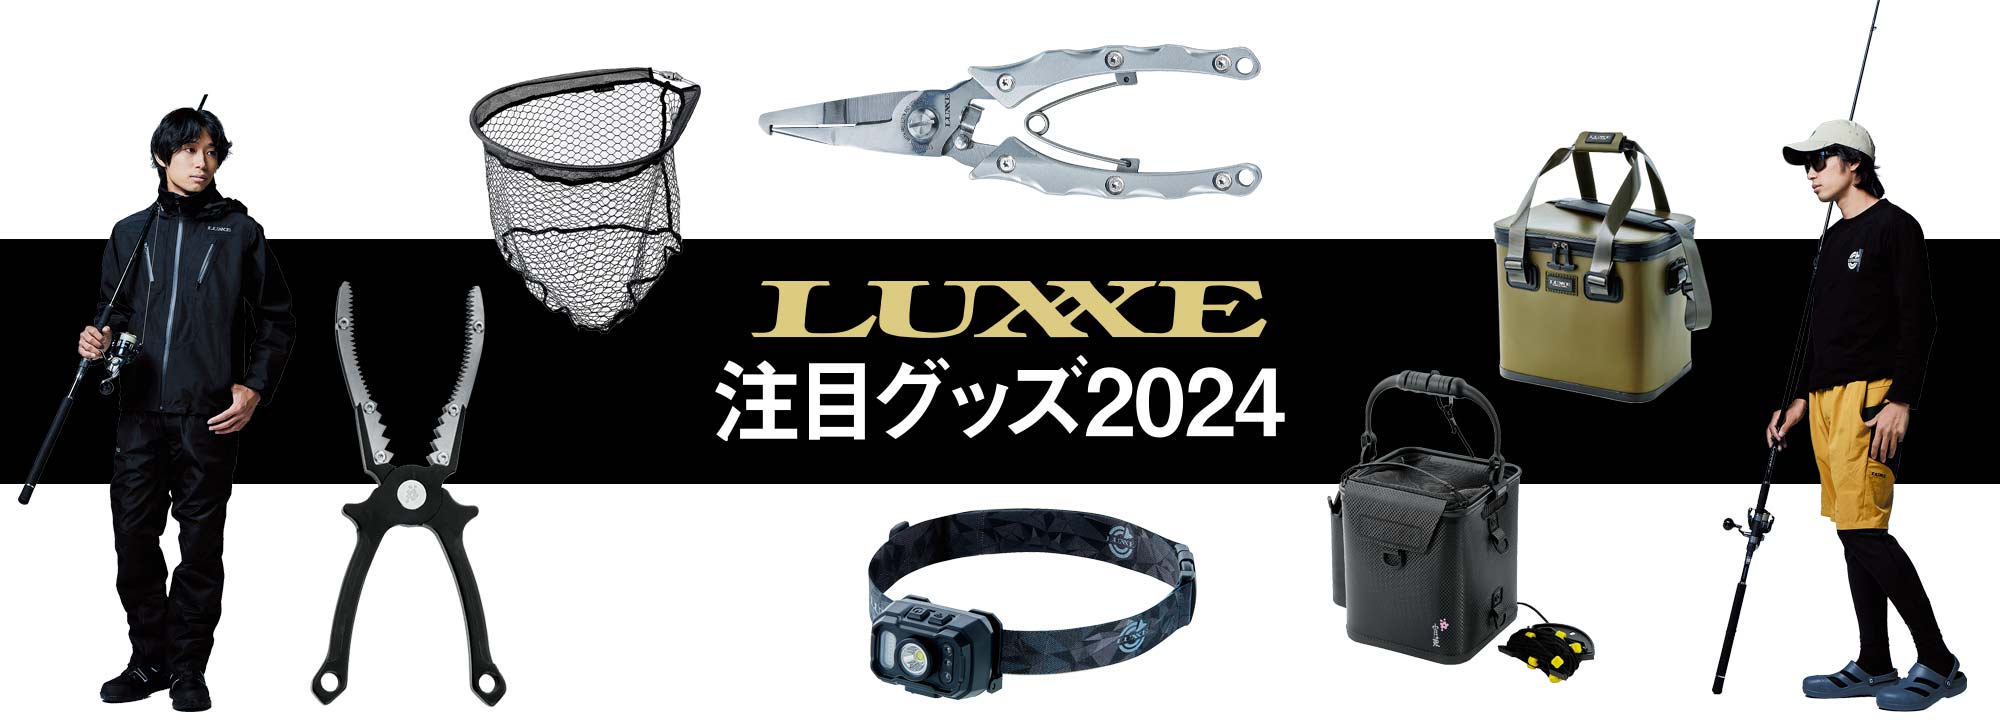 GOODS and APPAREL COLLECTION 2024　バナー画像